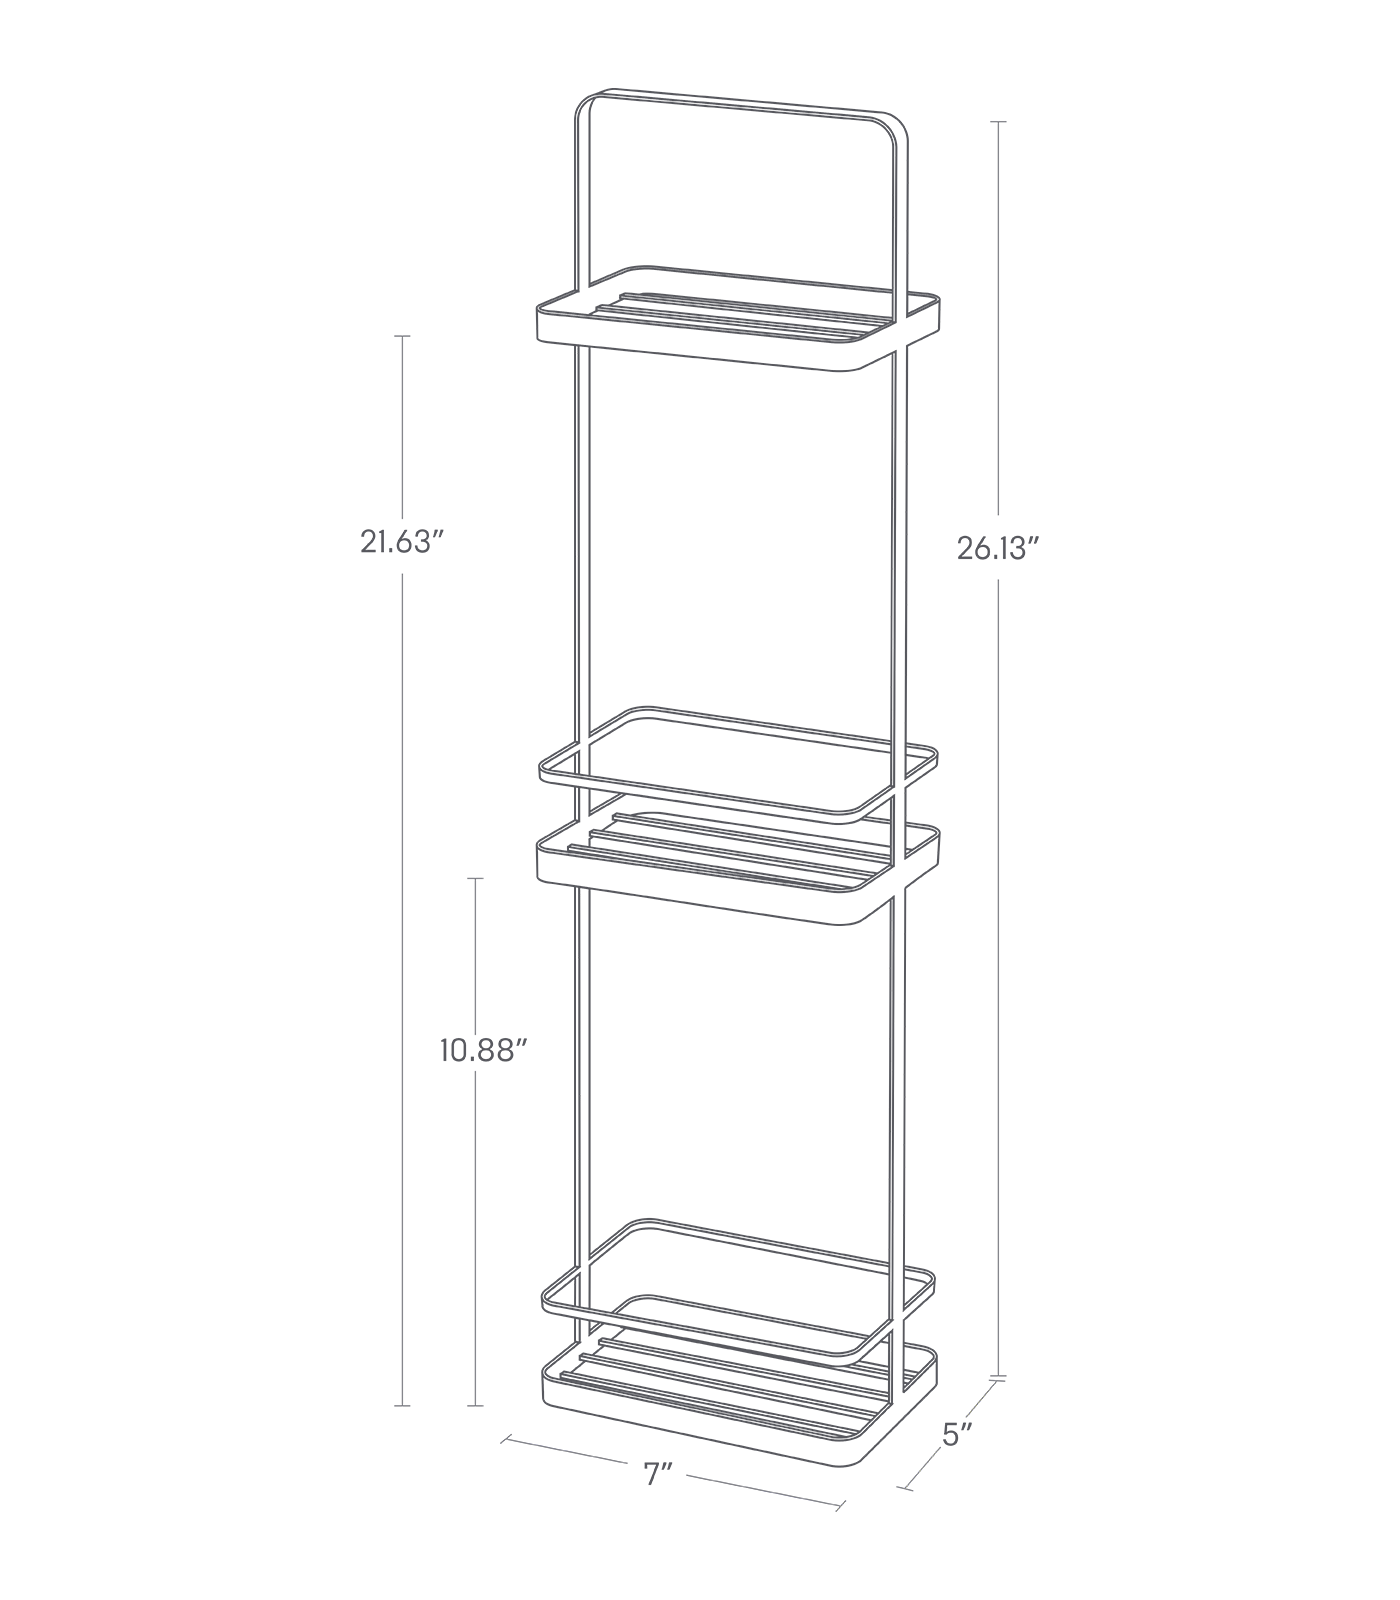 Dimension image for Shower Caddy - Large showing a total length of 7